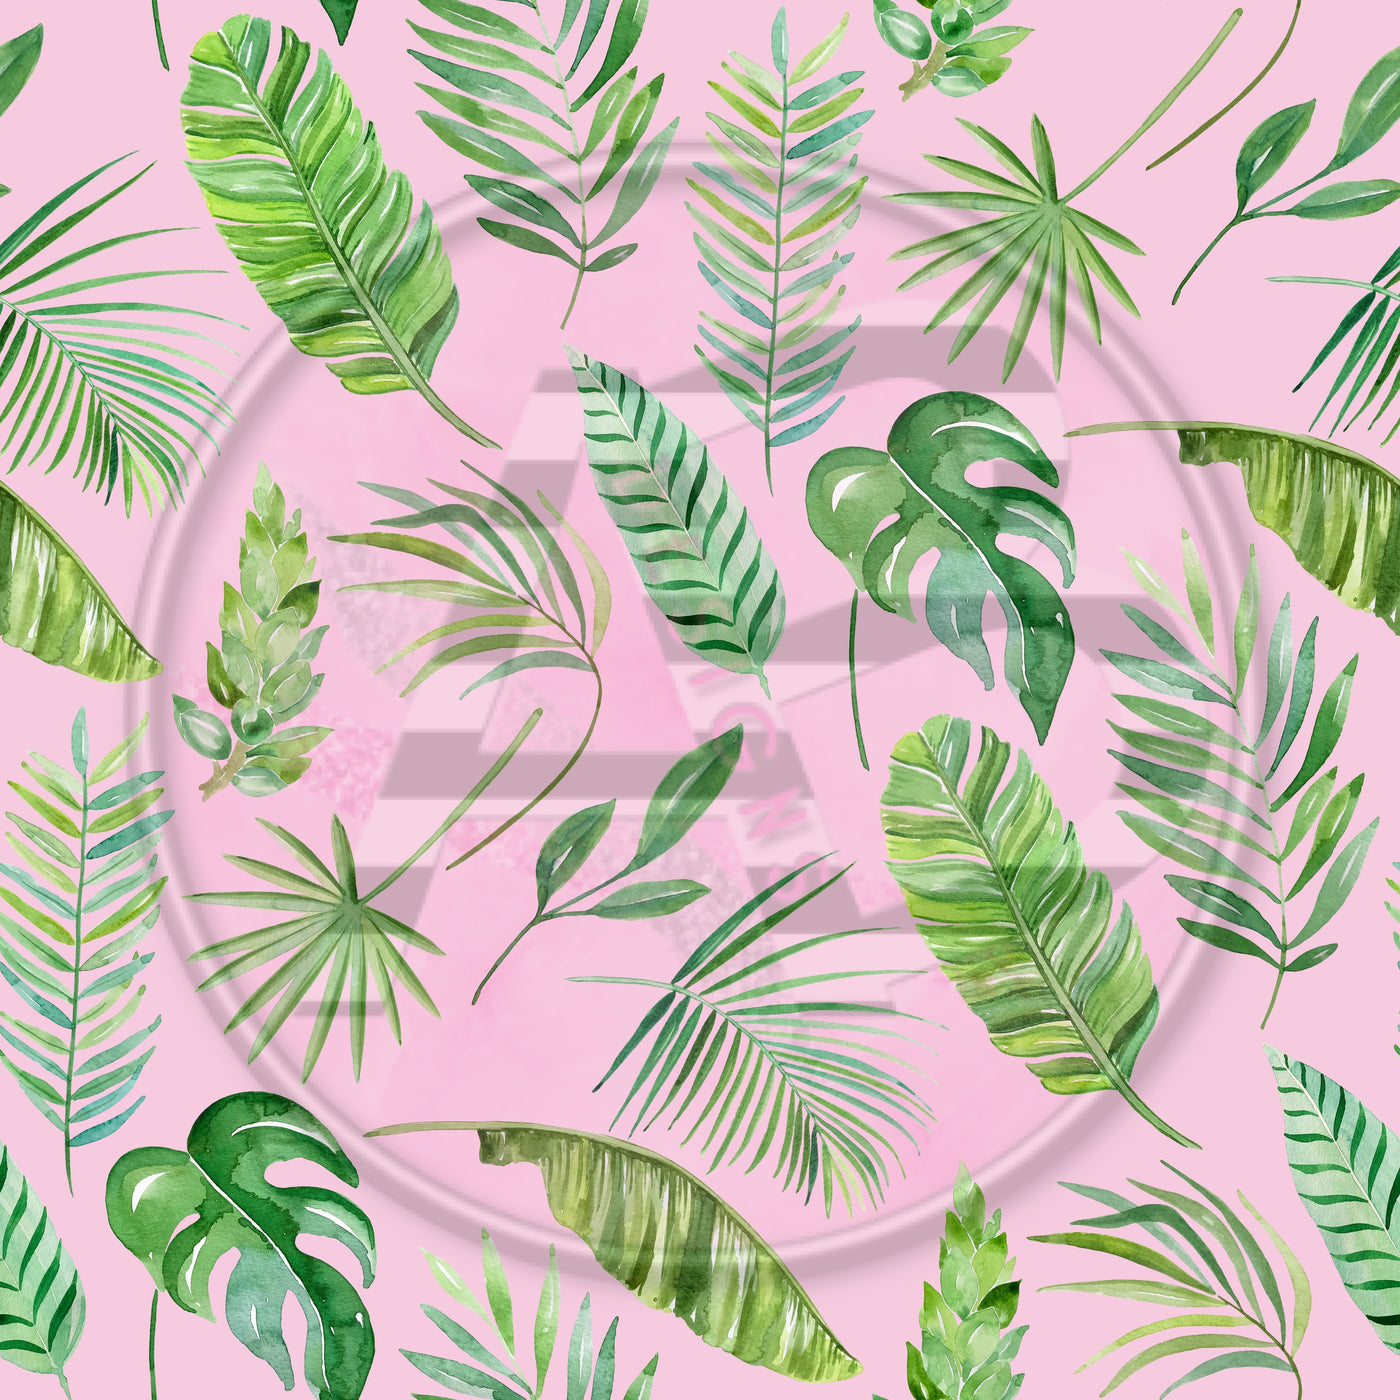 Adhesive Patterned Vinyl - Tropical 1160